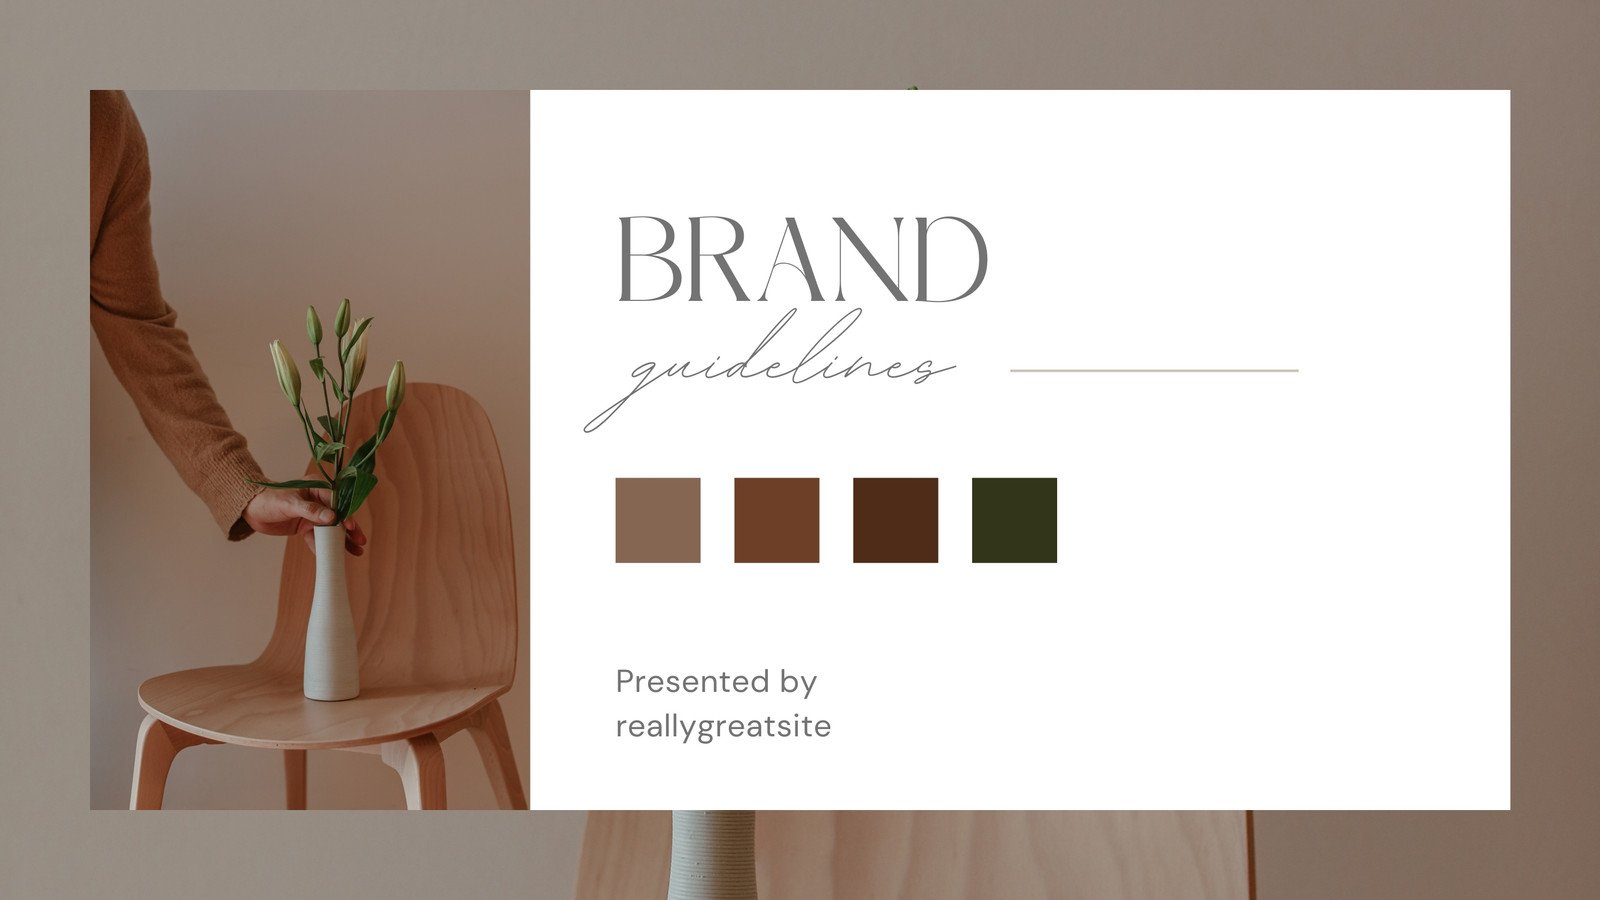 Page 8 - Free customizable brand guidelines presentation templates | Canva